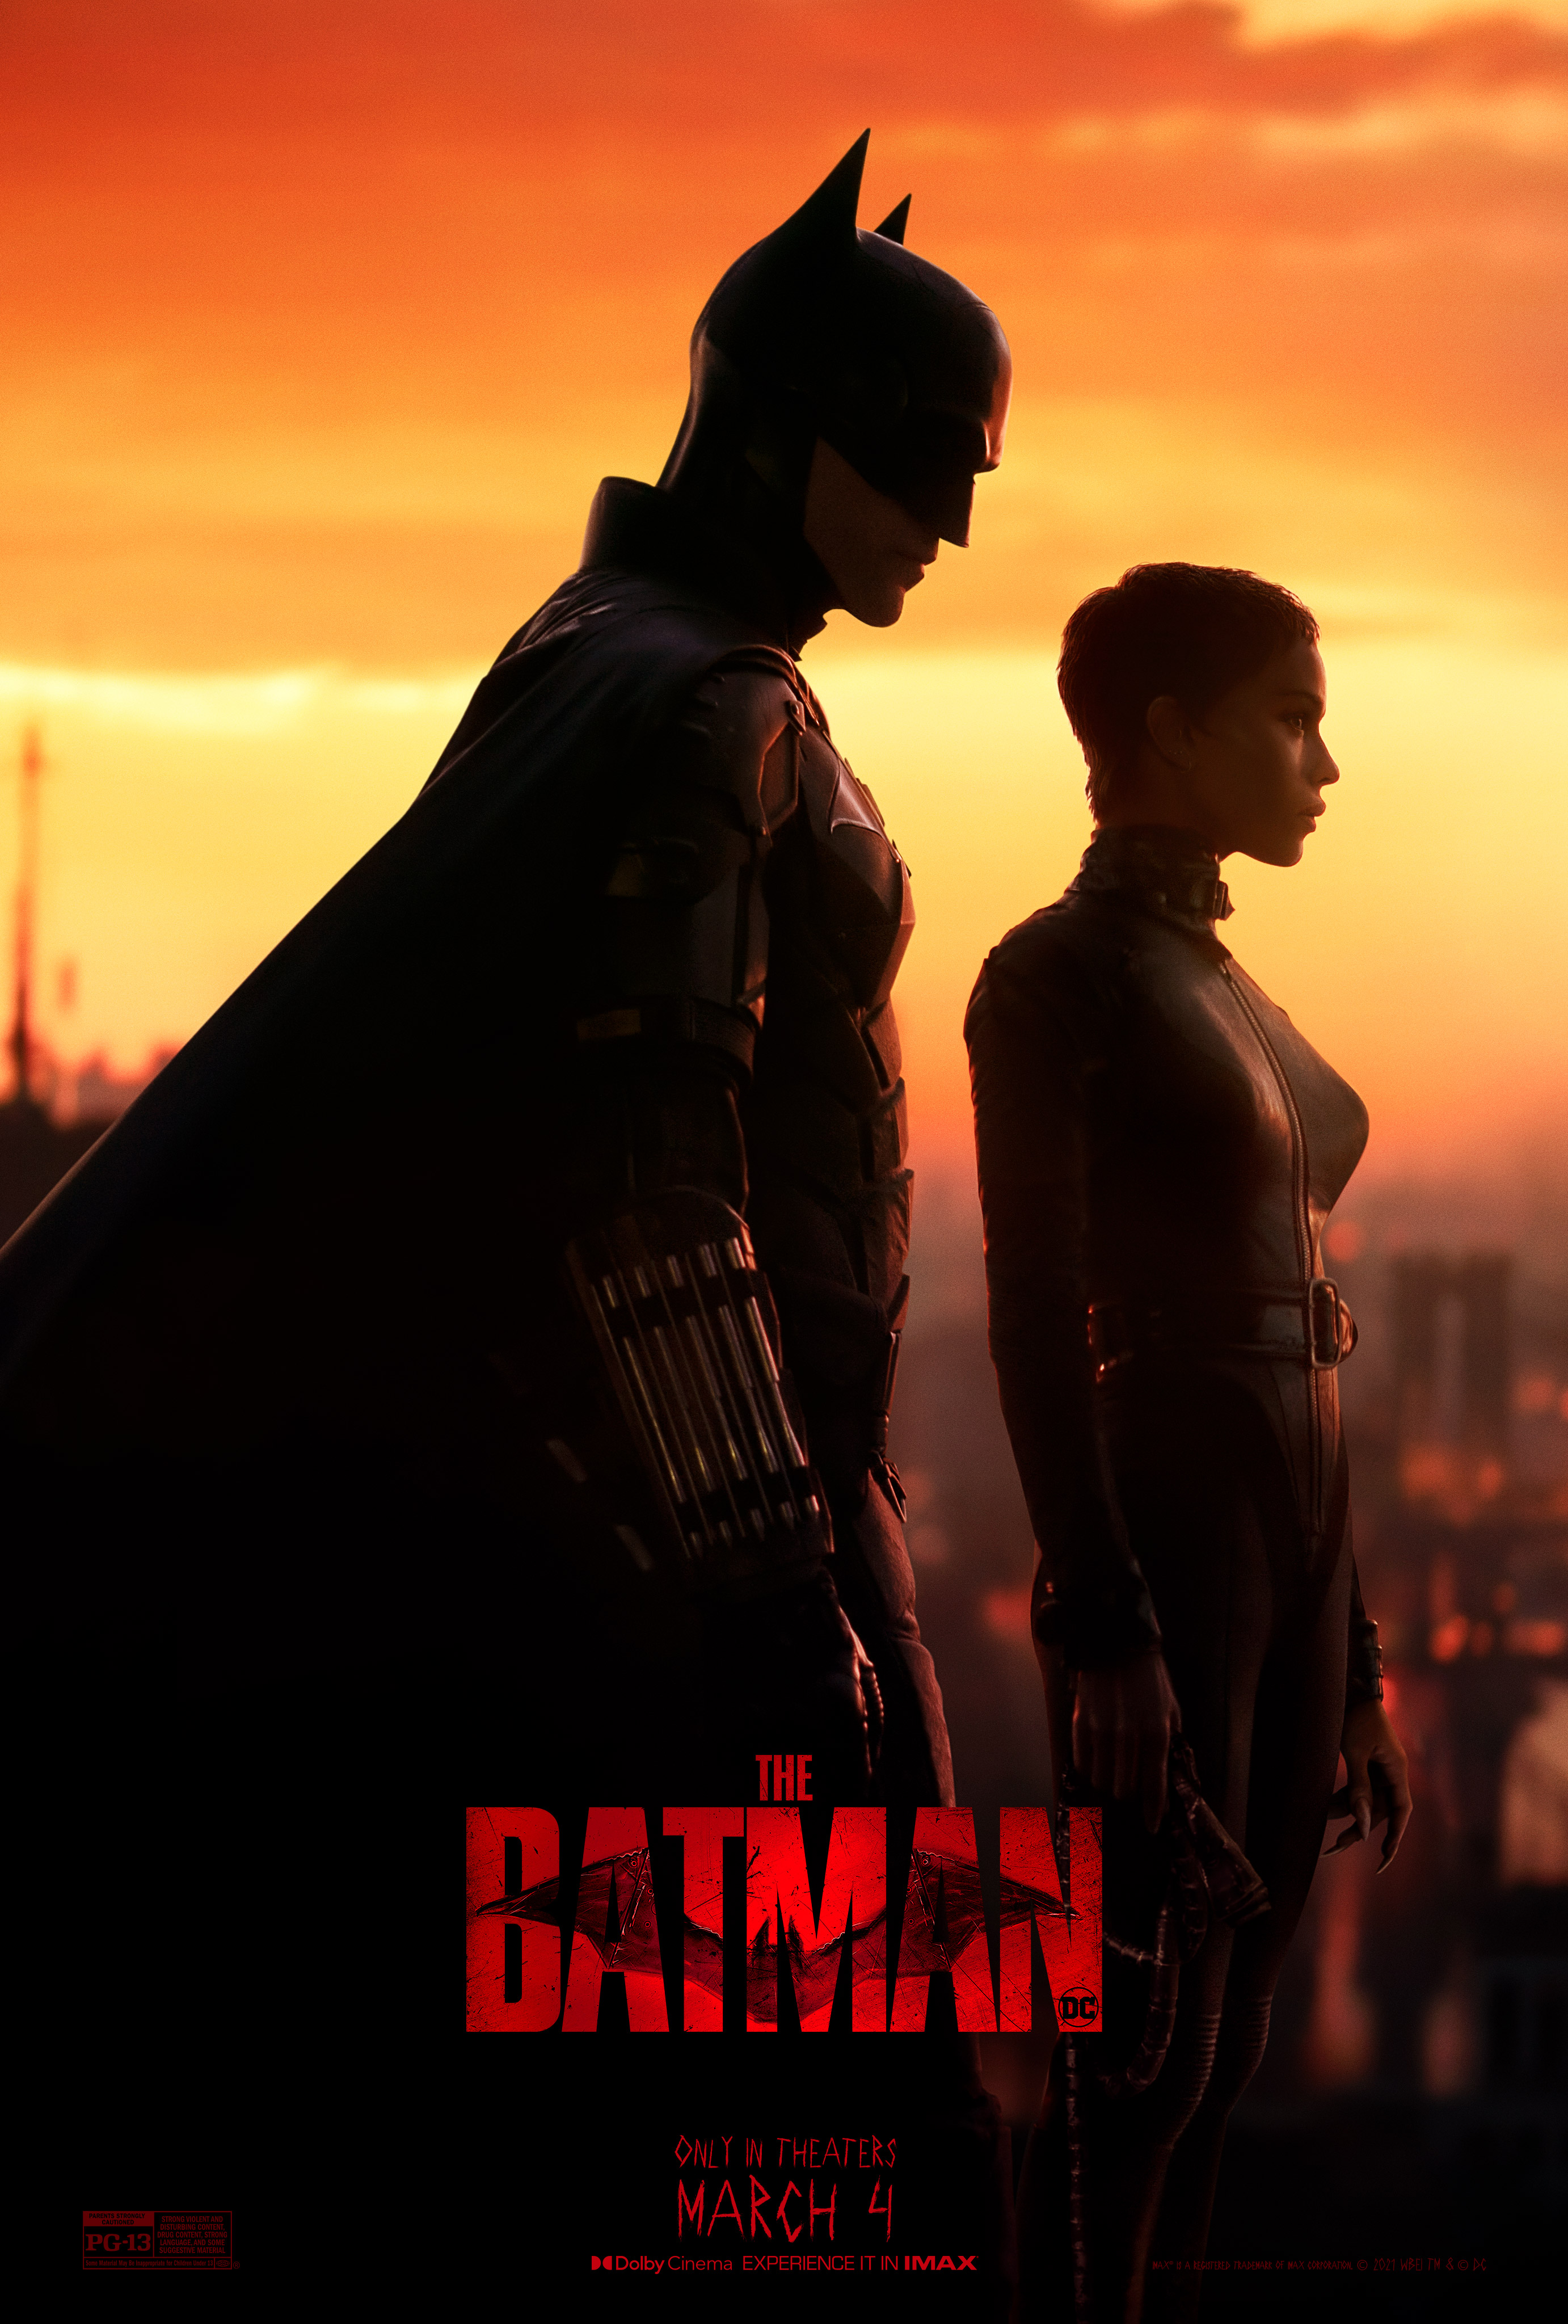 The New ‘The Batman’ Poster Has A Creepy Detail If You Look Close Enough